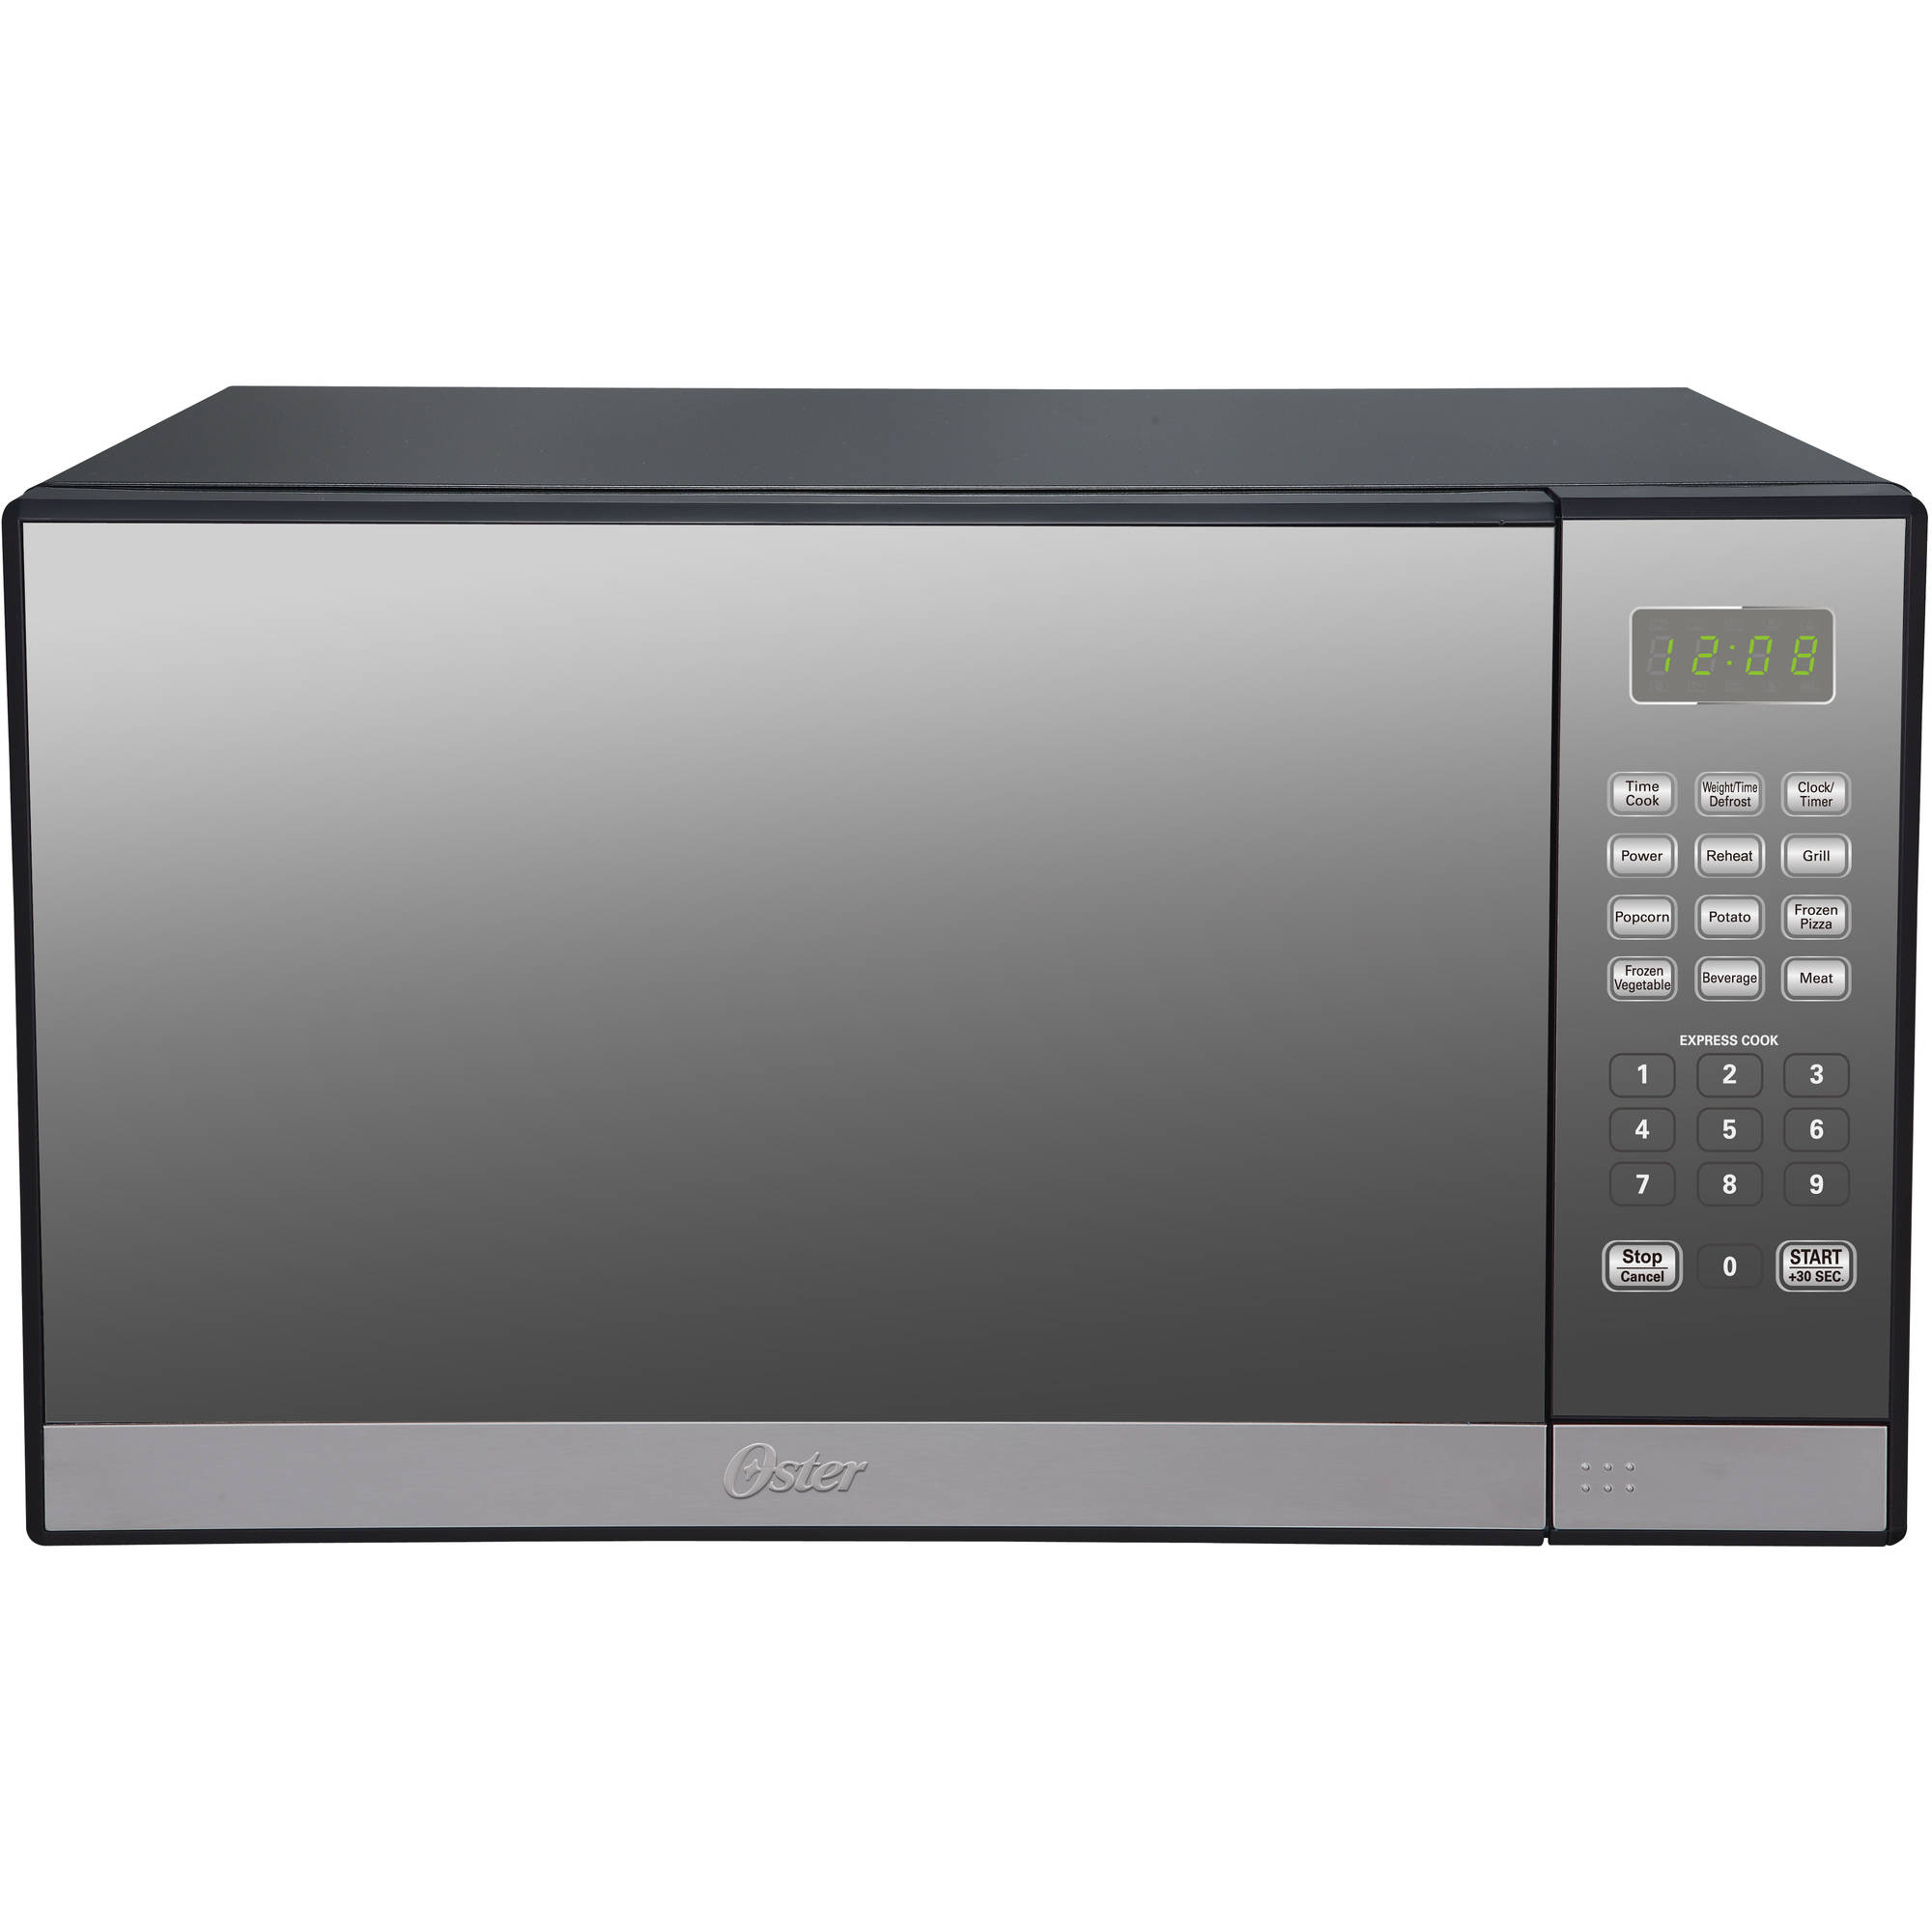 Oster 1.3 Cu. ft. Stainless Steel with Mirror Finish Microwave Oven with Grill - image 1 of 4